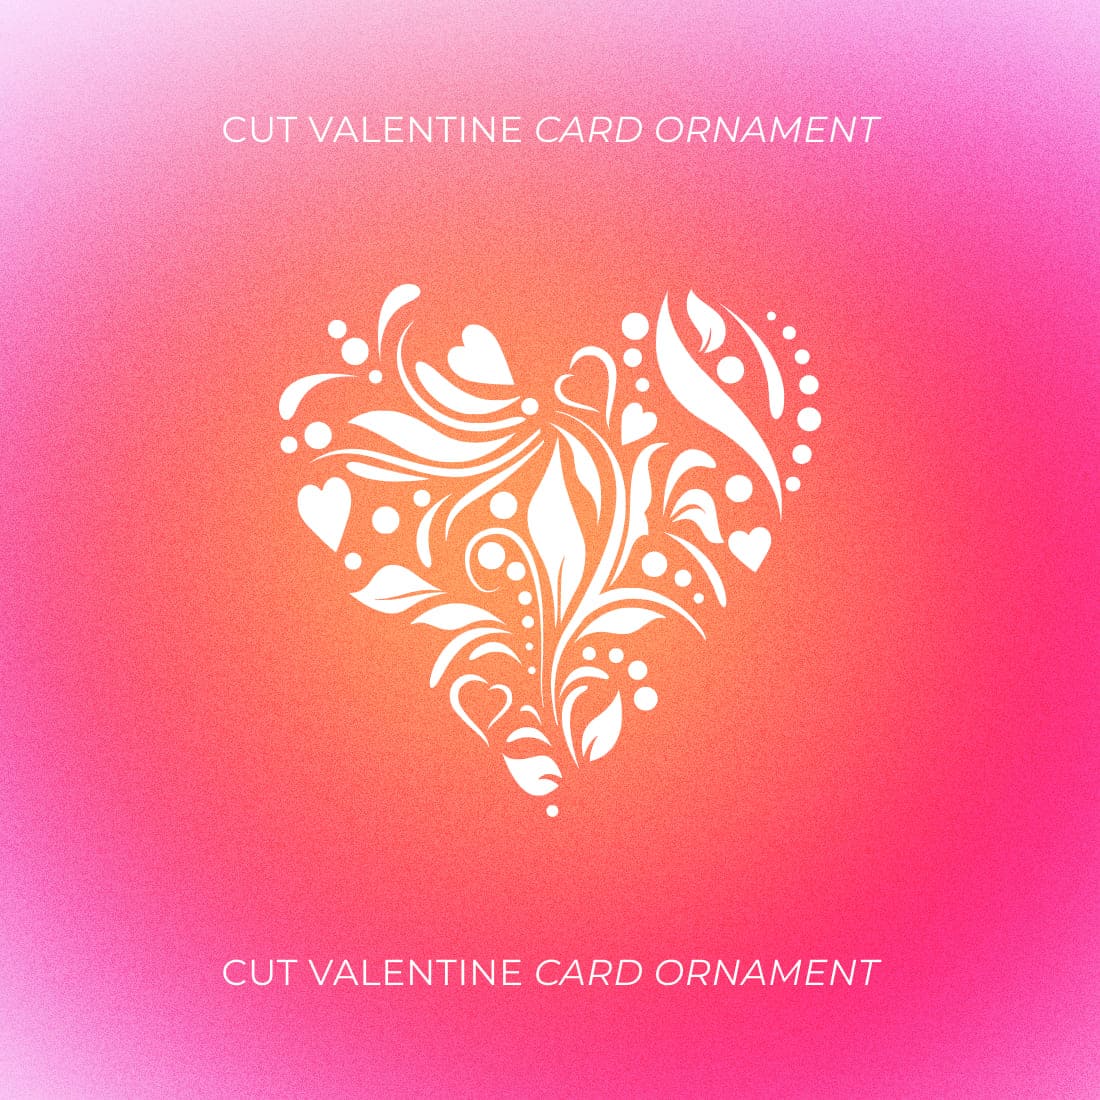 Cut Valentine Card Ornament - Great Colorful Preview.